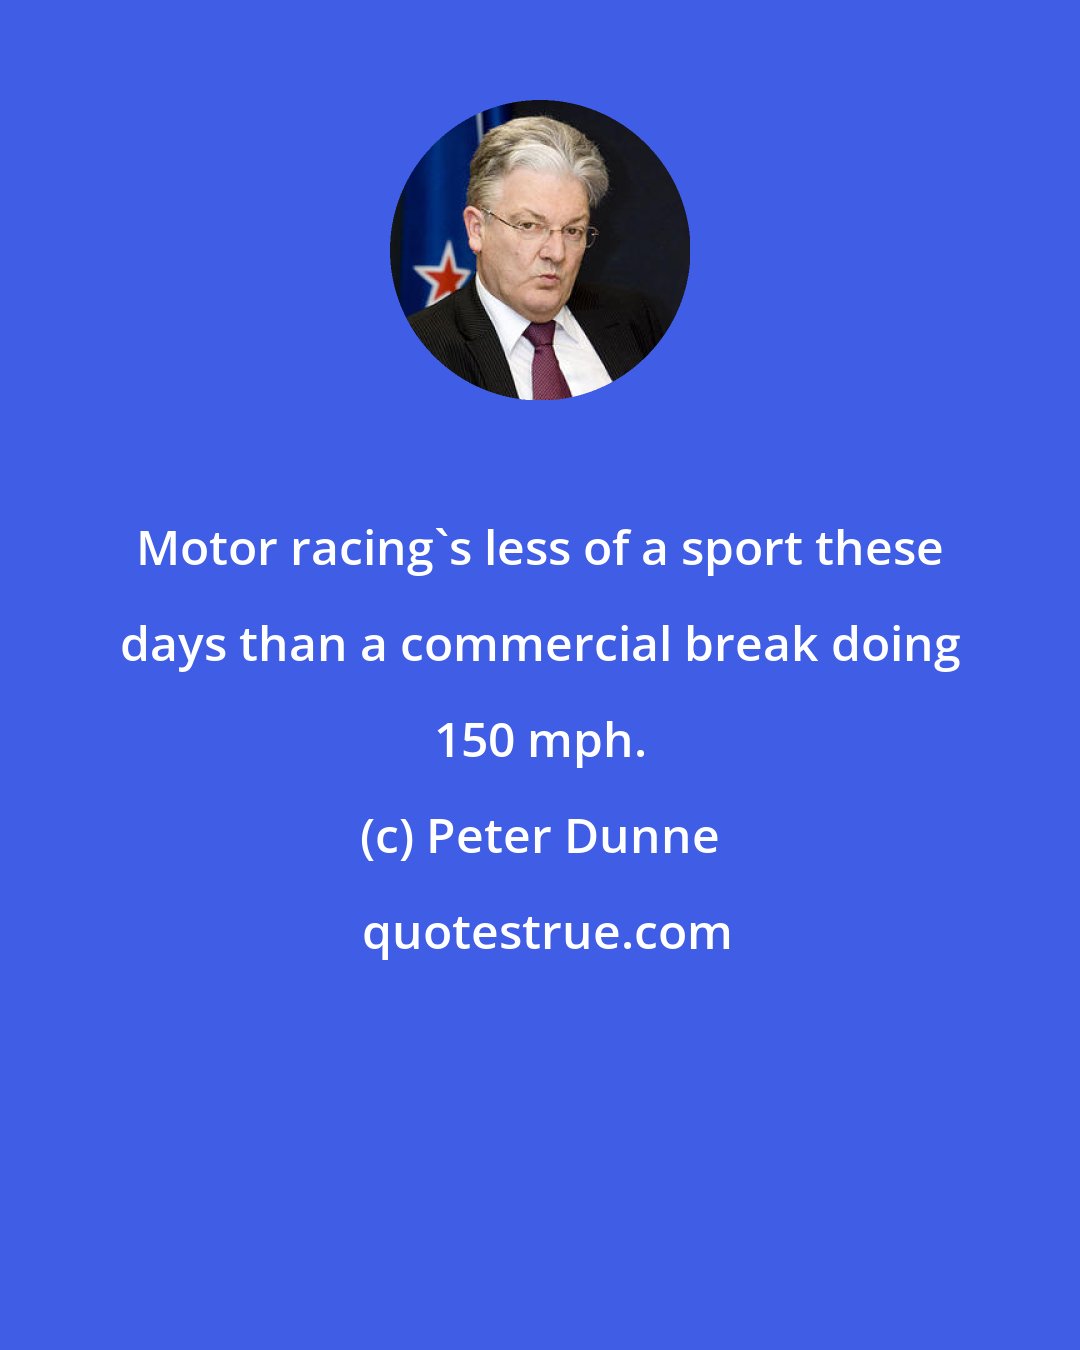 Peter Dunne: Motor racing's less of a sport these days than a commercial break doing 150 mph.